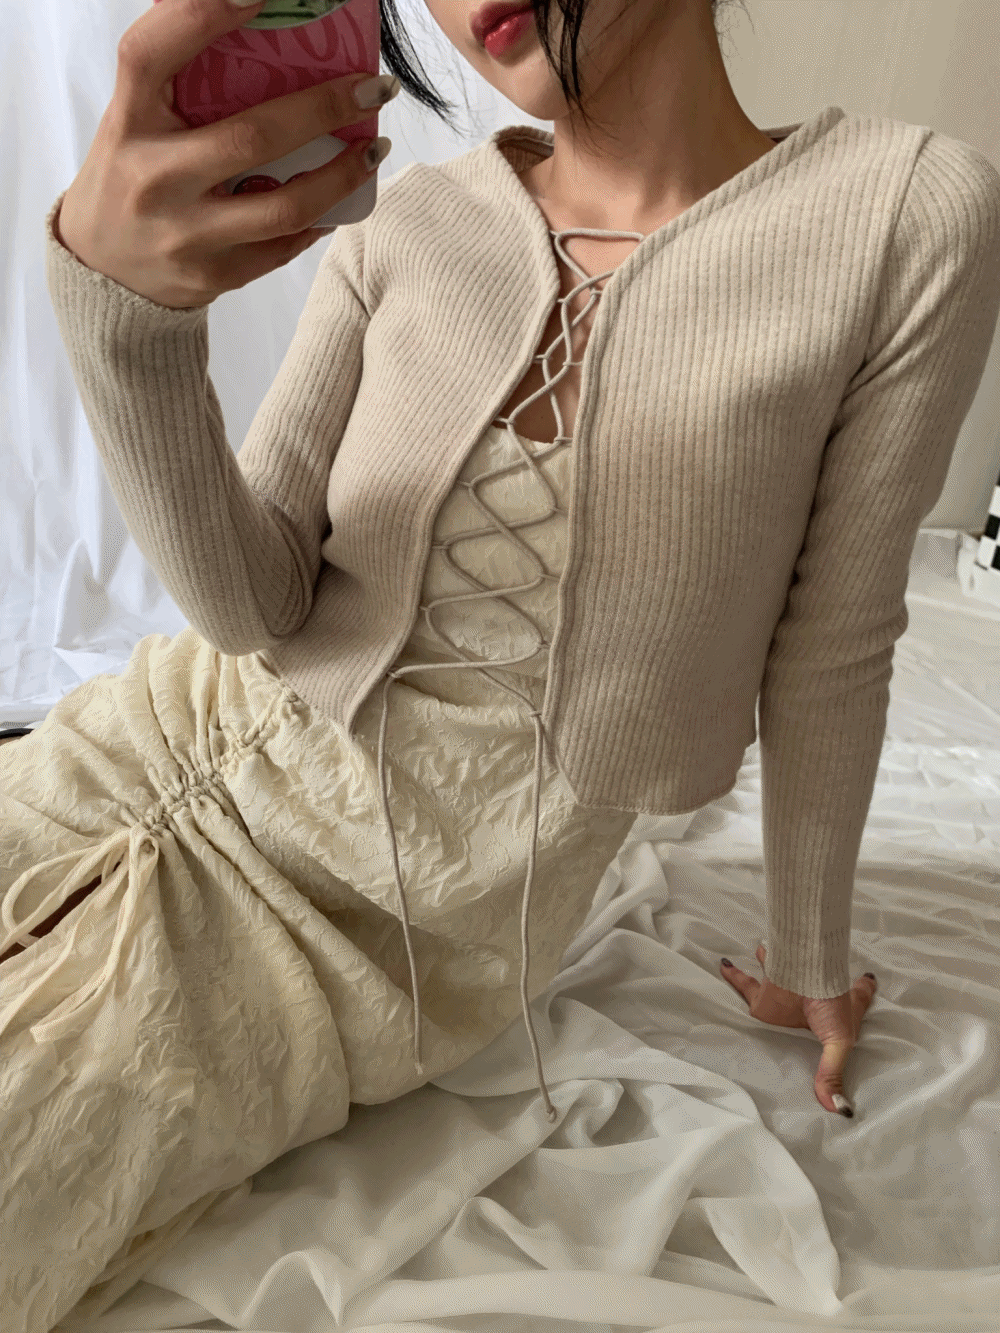 [Outer] Hazel May Eyelet Cardigan / one color